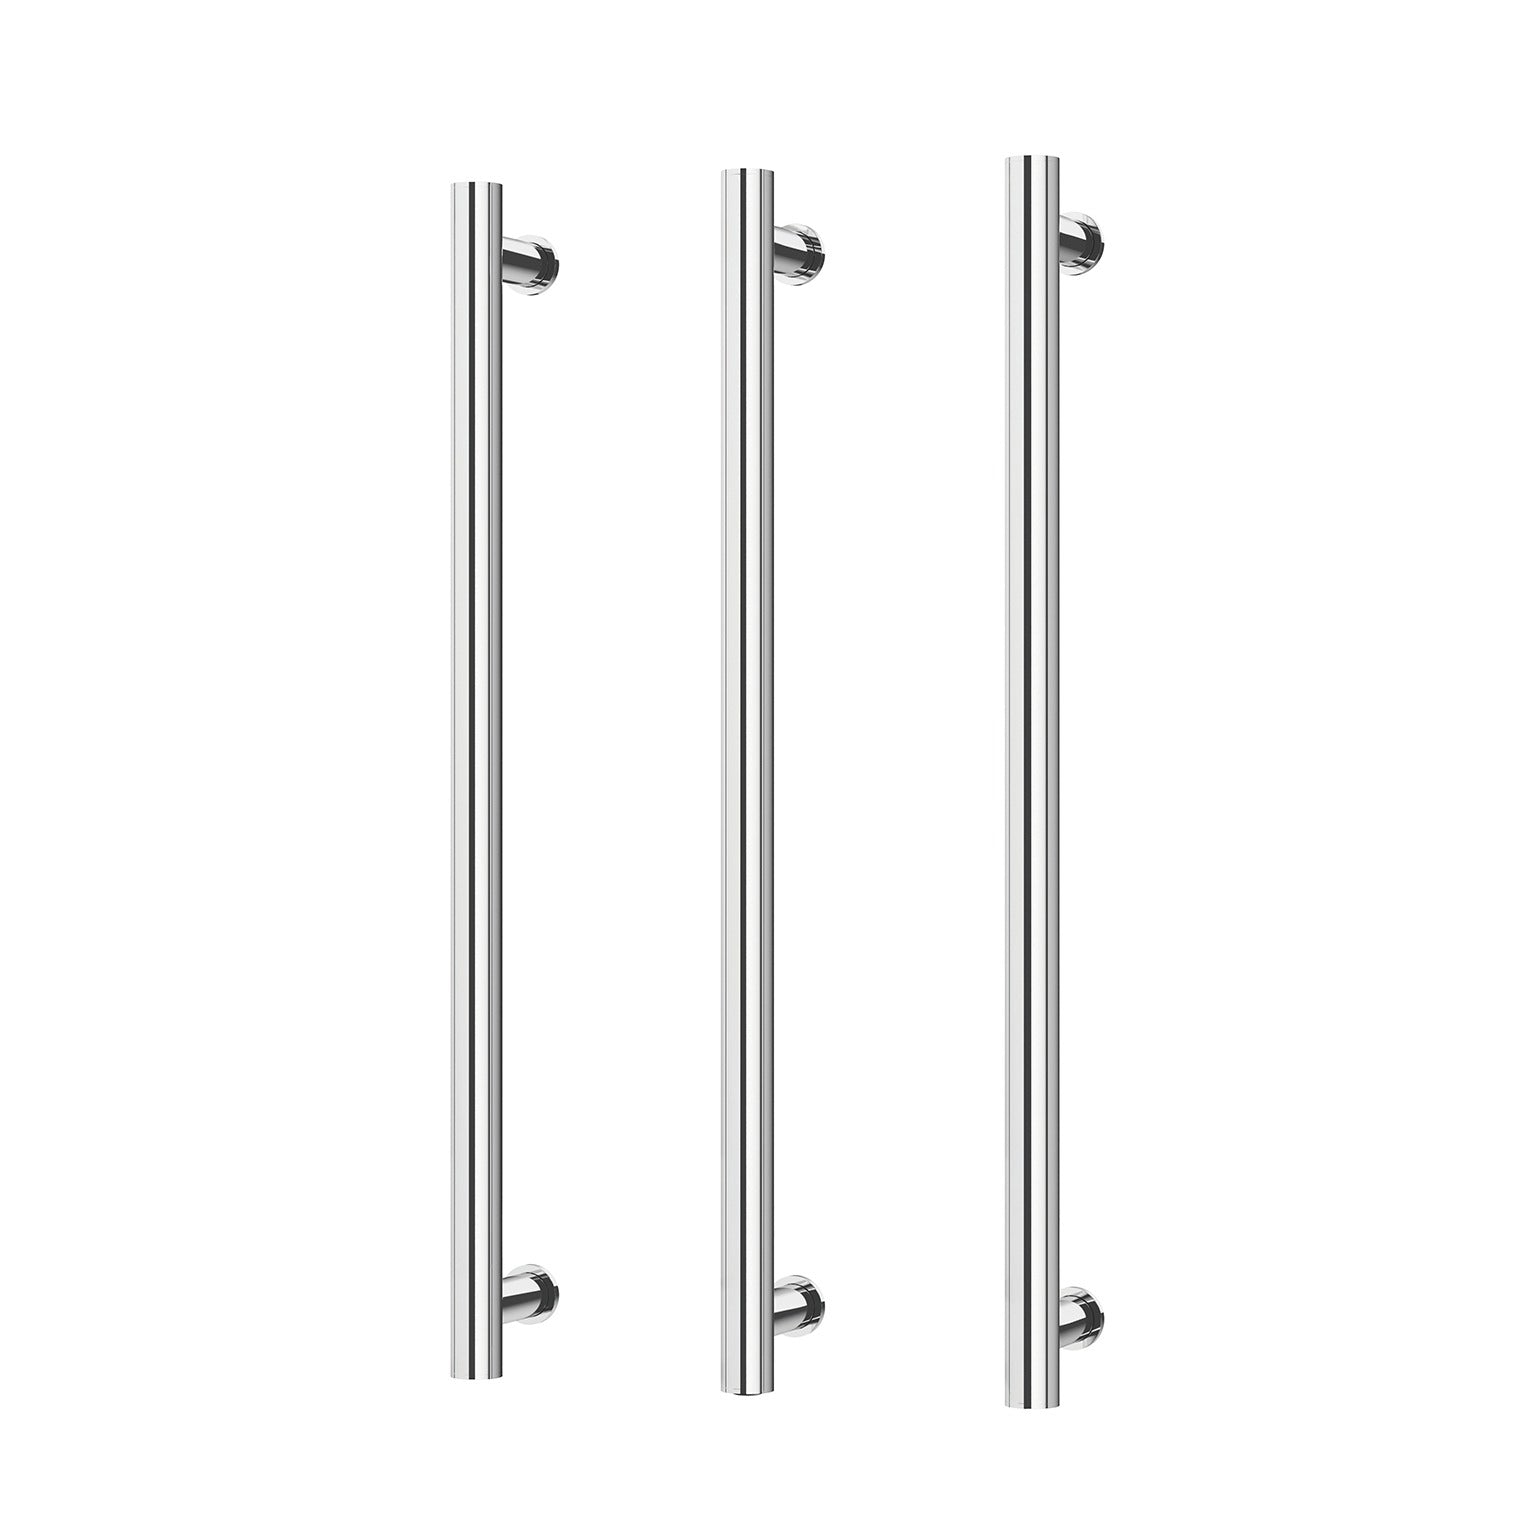 PHOENIX ROUND TRIPLE HEATED TOWEL RAIL CHROME (AVAILABLE IN 600MM AND 800MM)